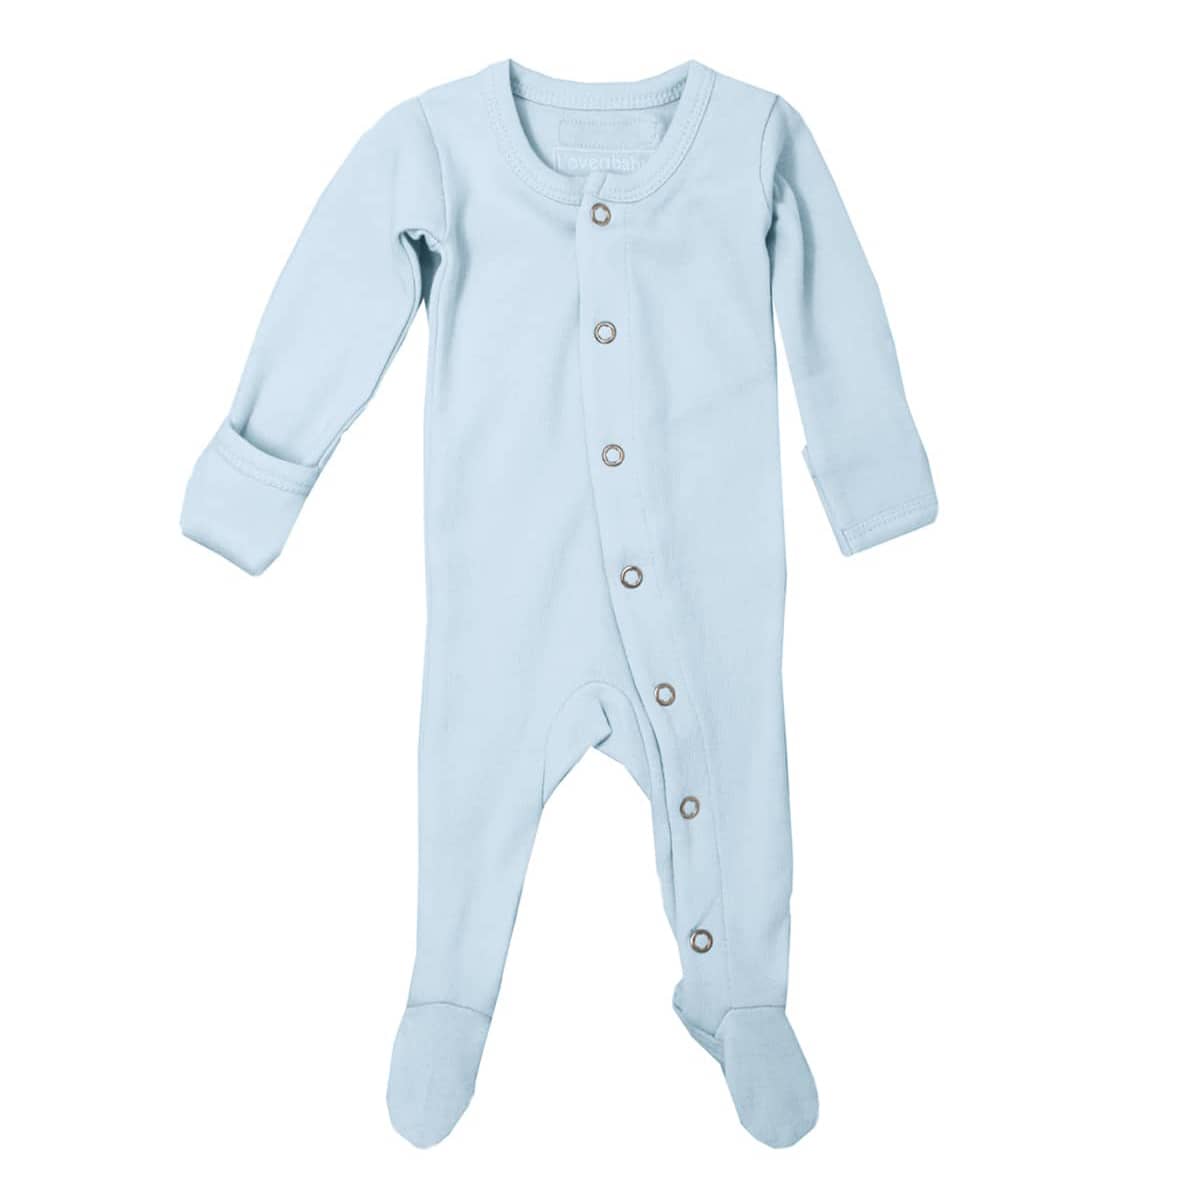 L'ovedbaby Organic Gl'oved Footed Overall - Moonbeam